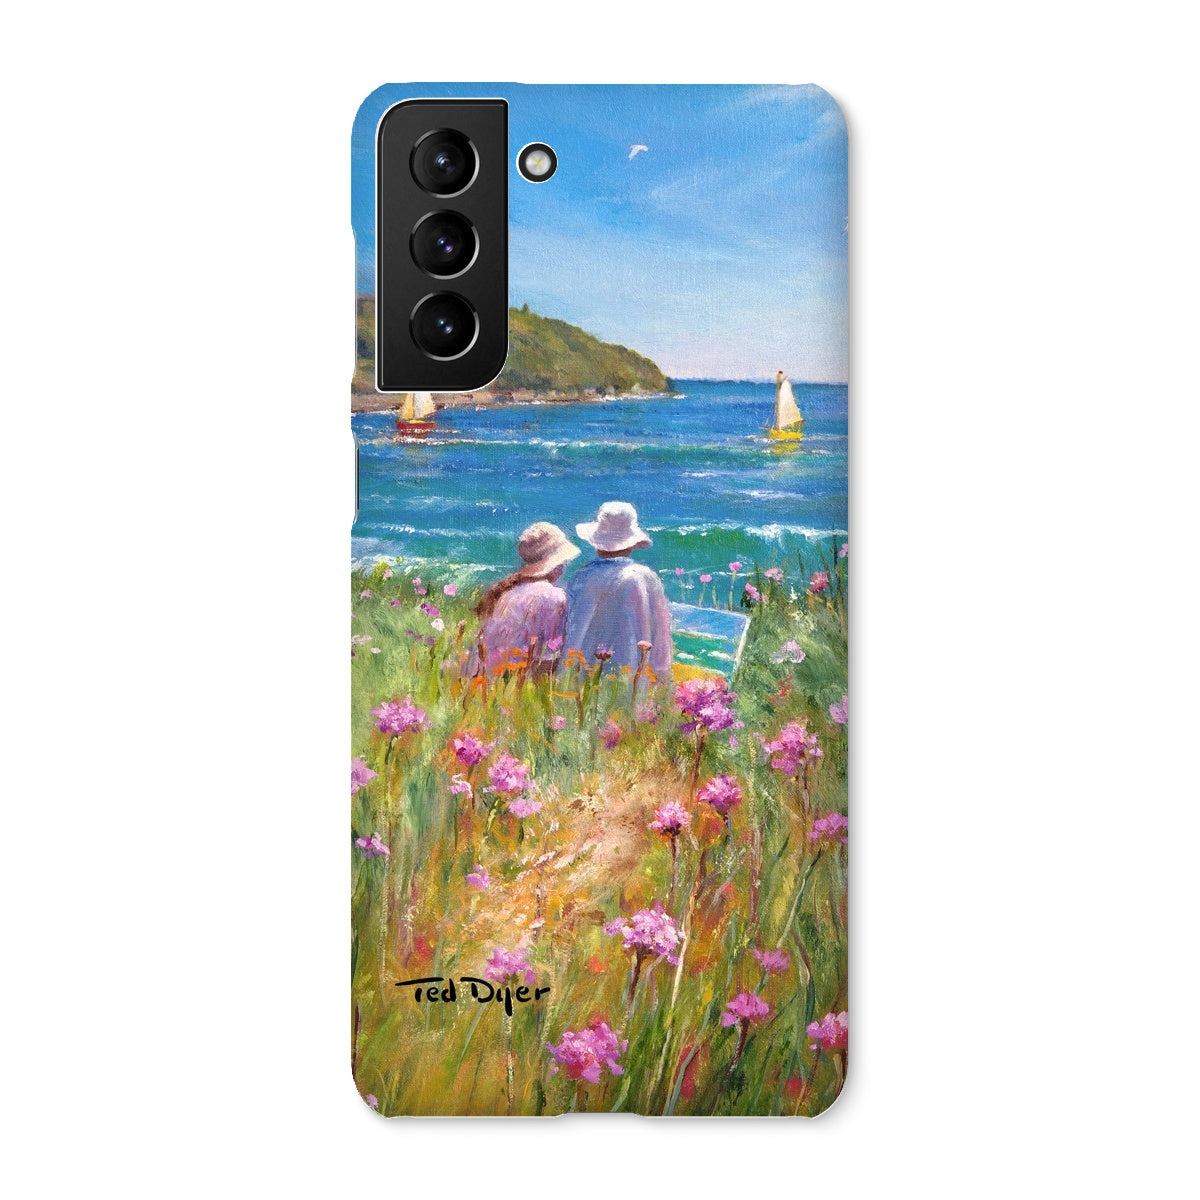 Snap Art Phone Case. Sea Pinks and Painters, Falmouth. Artist Ted Dyer. Cornwall Art Gallery